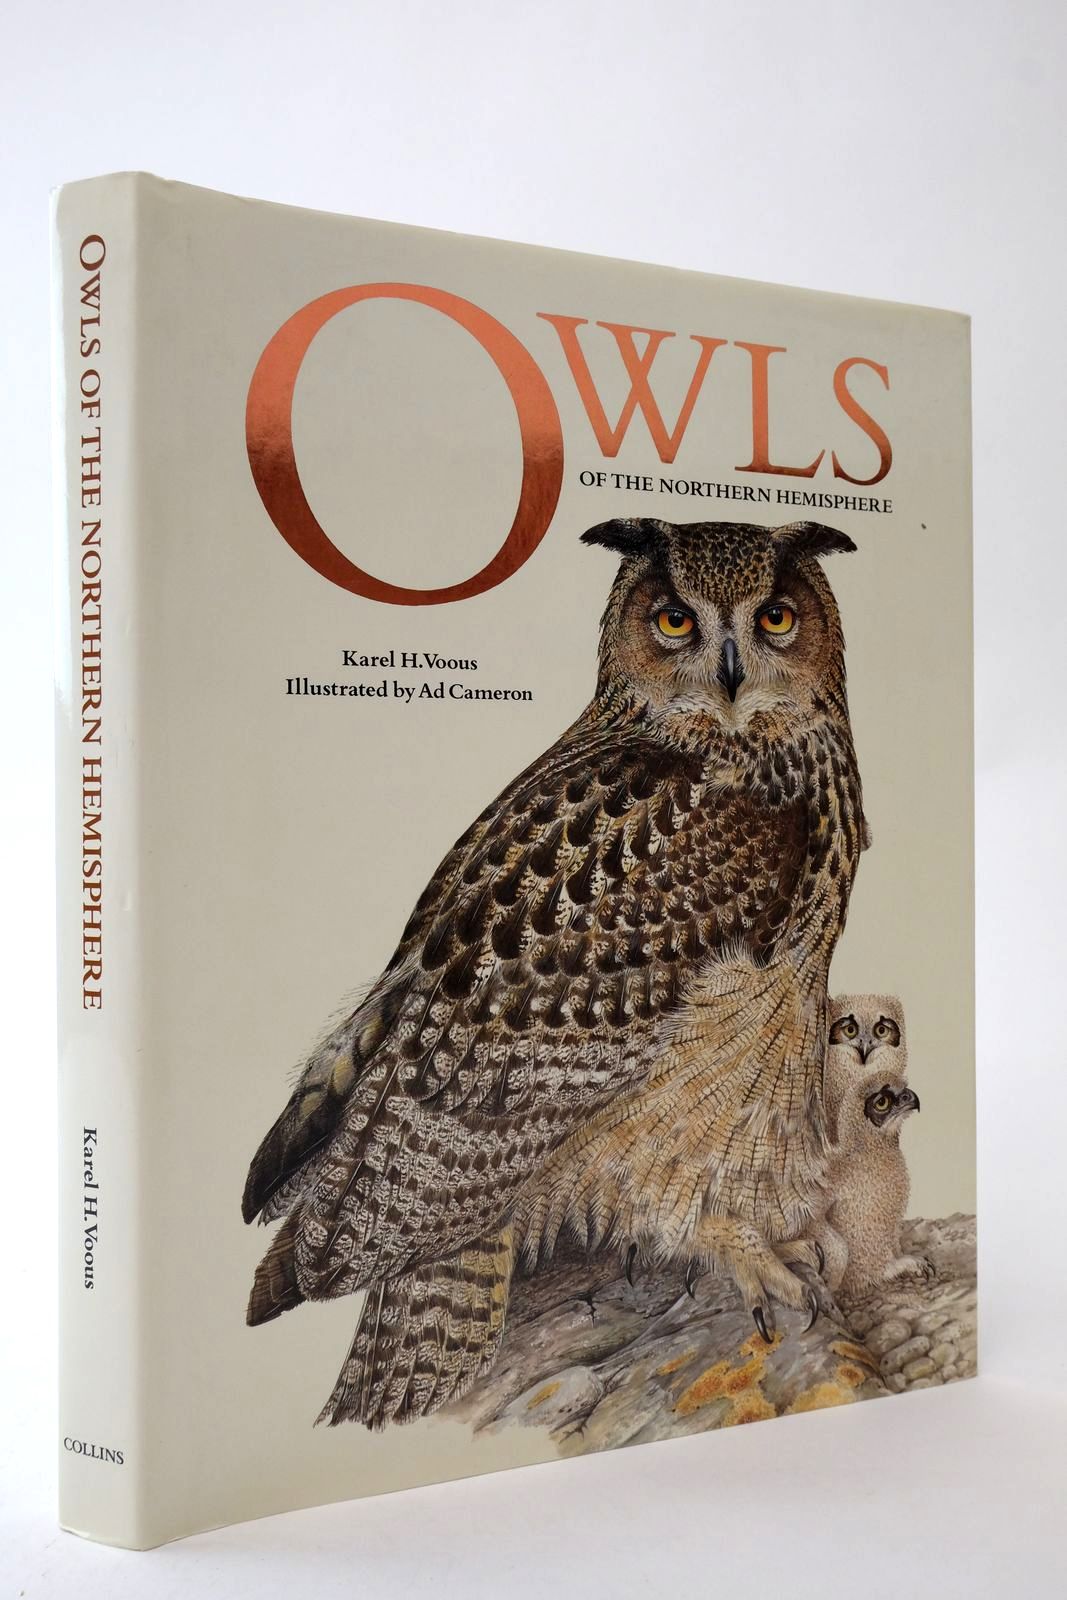 Photo of OWLS OF THE NORTHERN HEMISPHERE written by Voous, Karel H. illustrated by Cameron, Ad published by Collins (STOCK CODE: 2139840)  for sale by Stella & Rose's Books